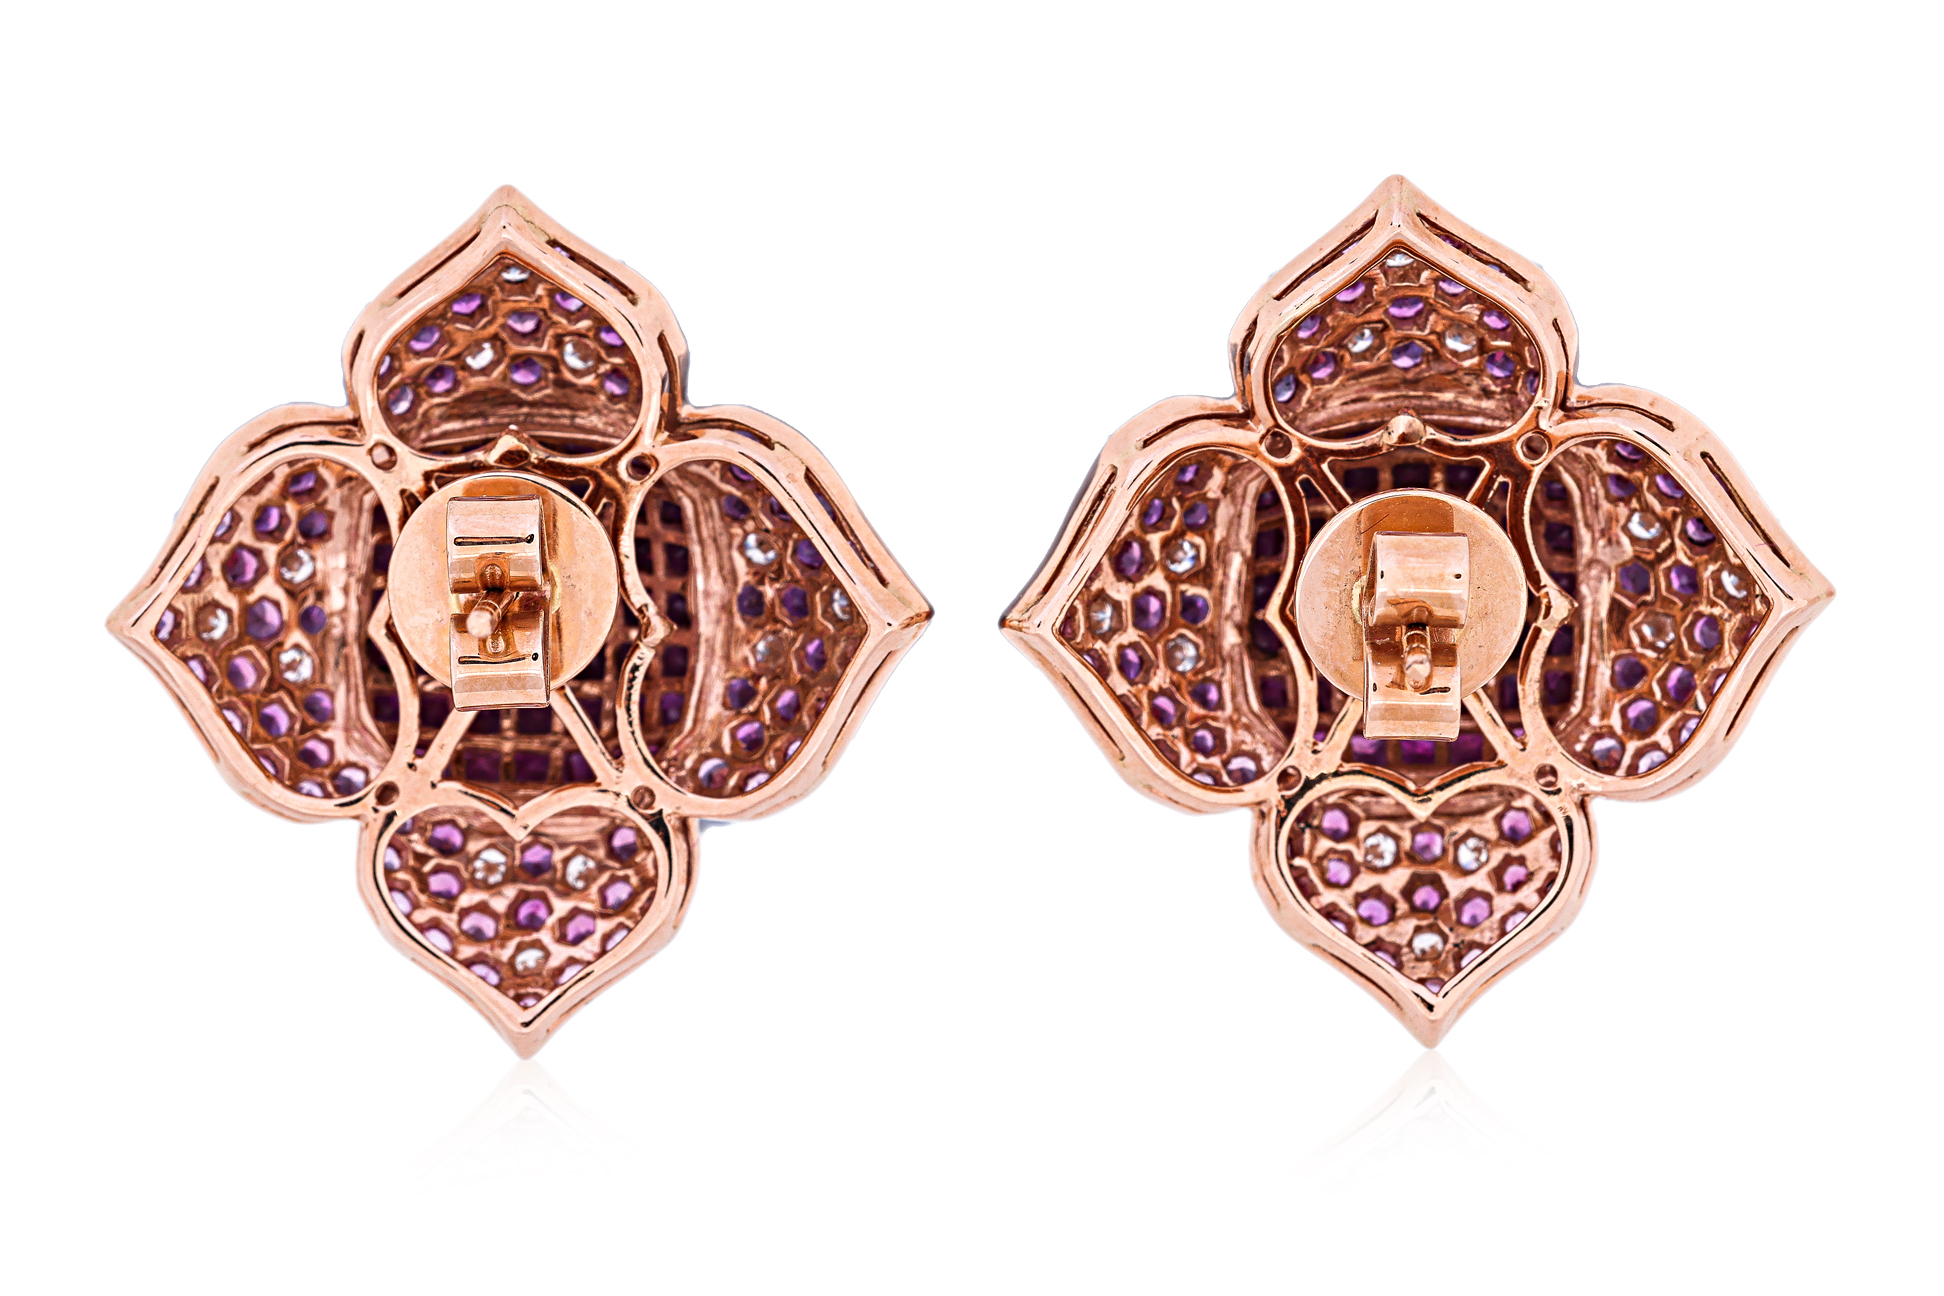 A PAIR OF MYSTERY SET PINK SAPPHIRE AND DIAMOND EARRINGS - Image 3 of 3